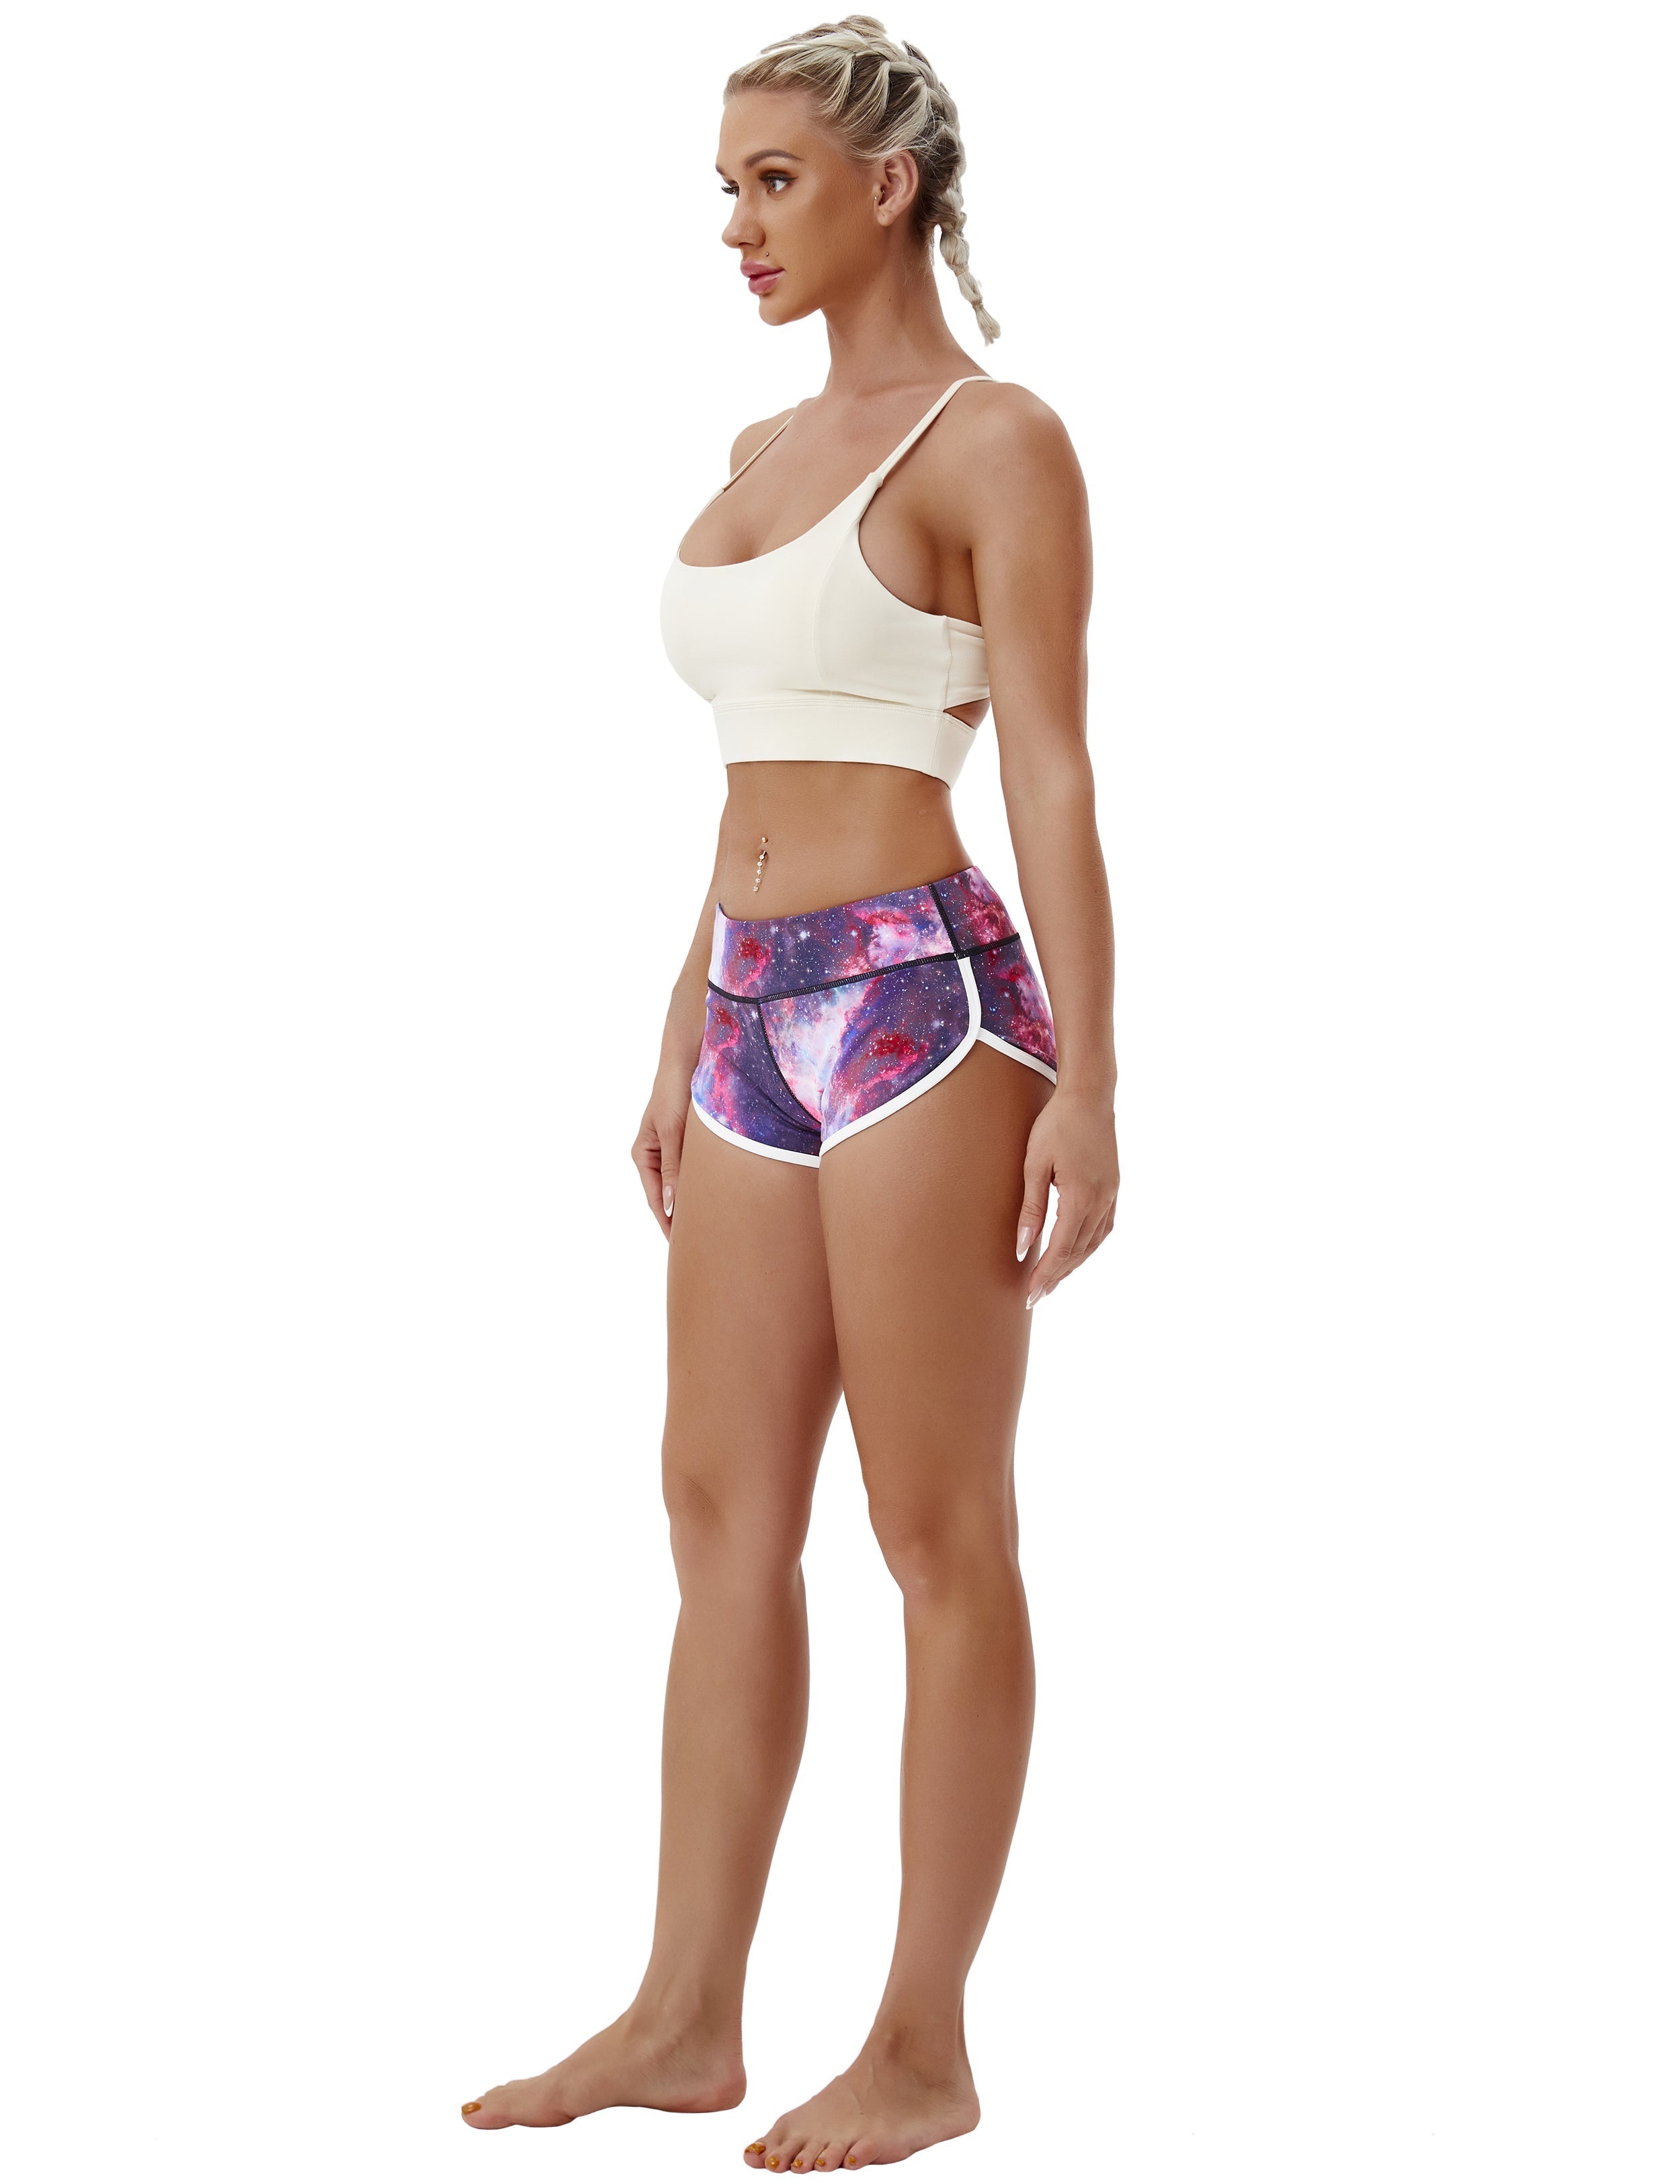 Printed Booty Jogging Shorts galaxy Sleek, soft, smooth and totally comfortable: our newest sexy style is here. Softest-ever fabric High elasticity High density 4-way stretch Fabric doesn't attract lint easily No see-through Moisture-wicking Machine wash 78% Polyester, 22% Spandex